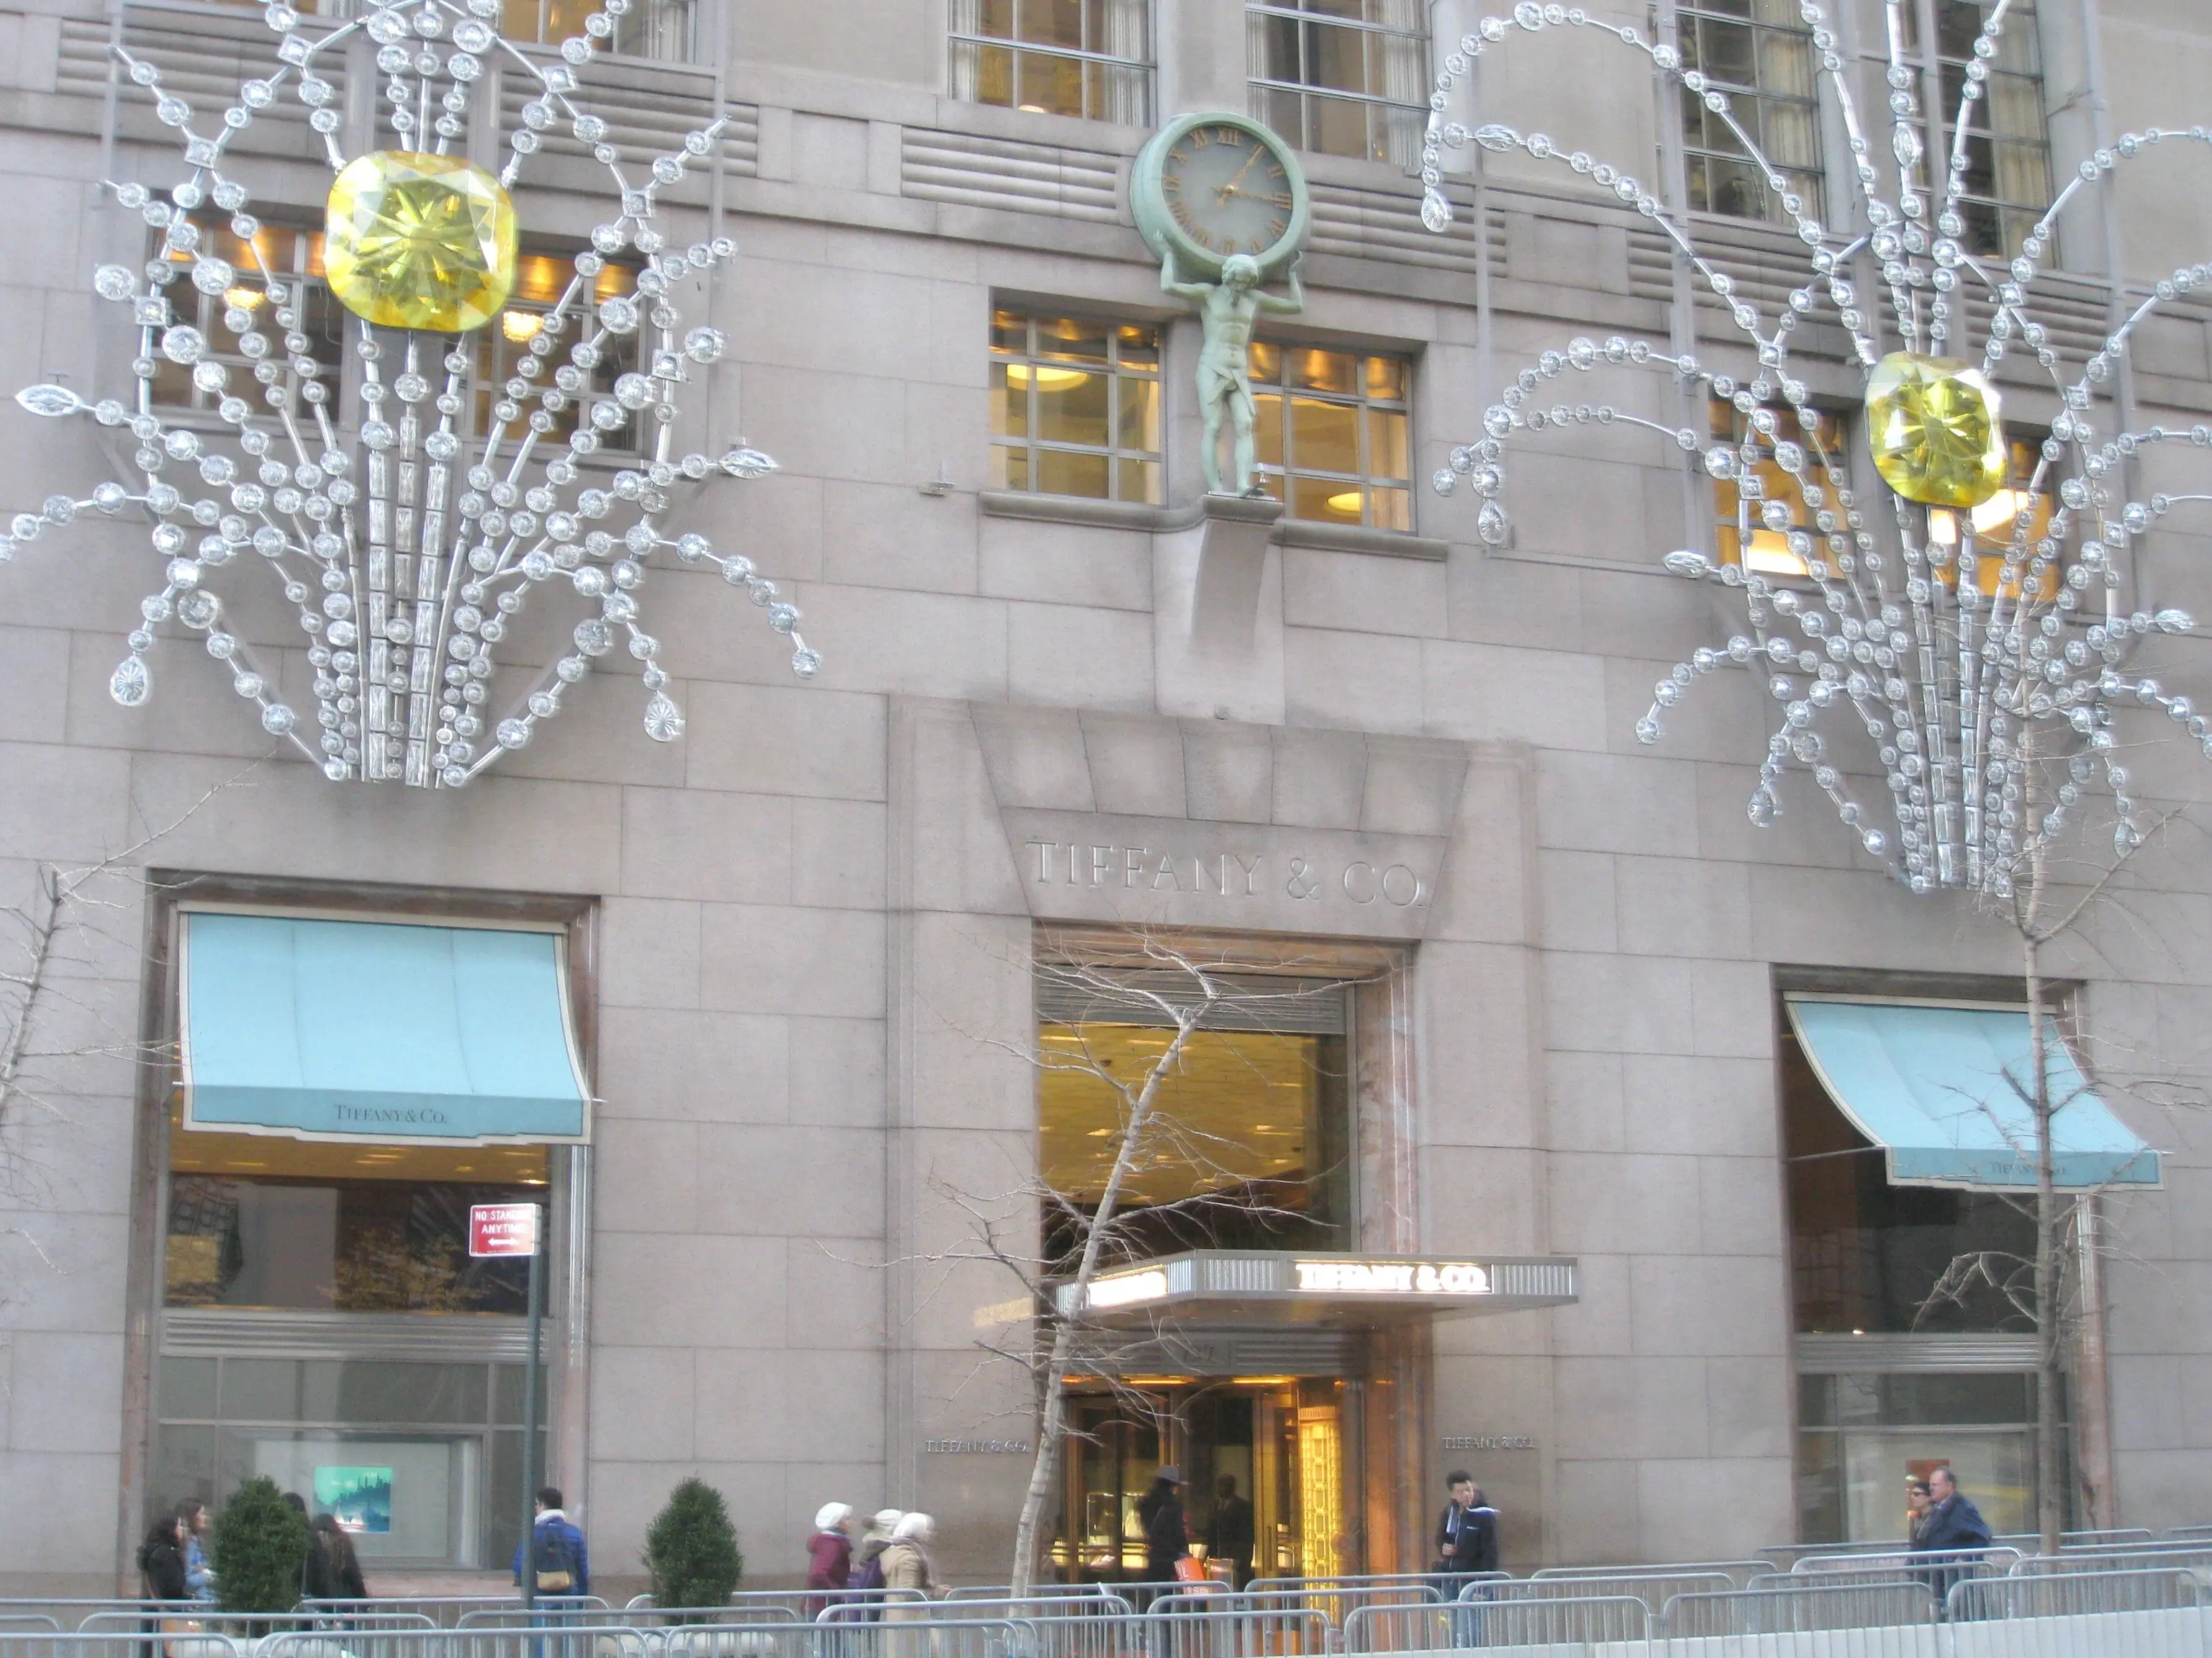 Tiffany & Co. landmark NYC location catches fire reportedly due to